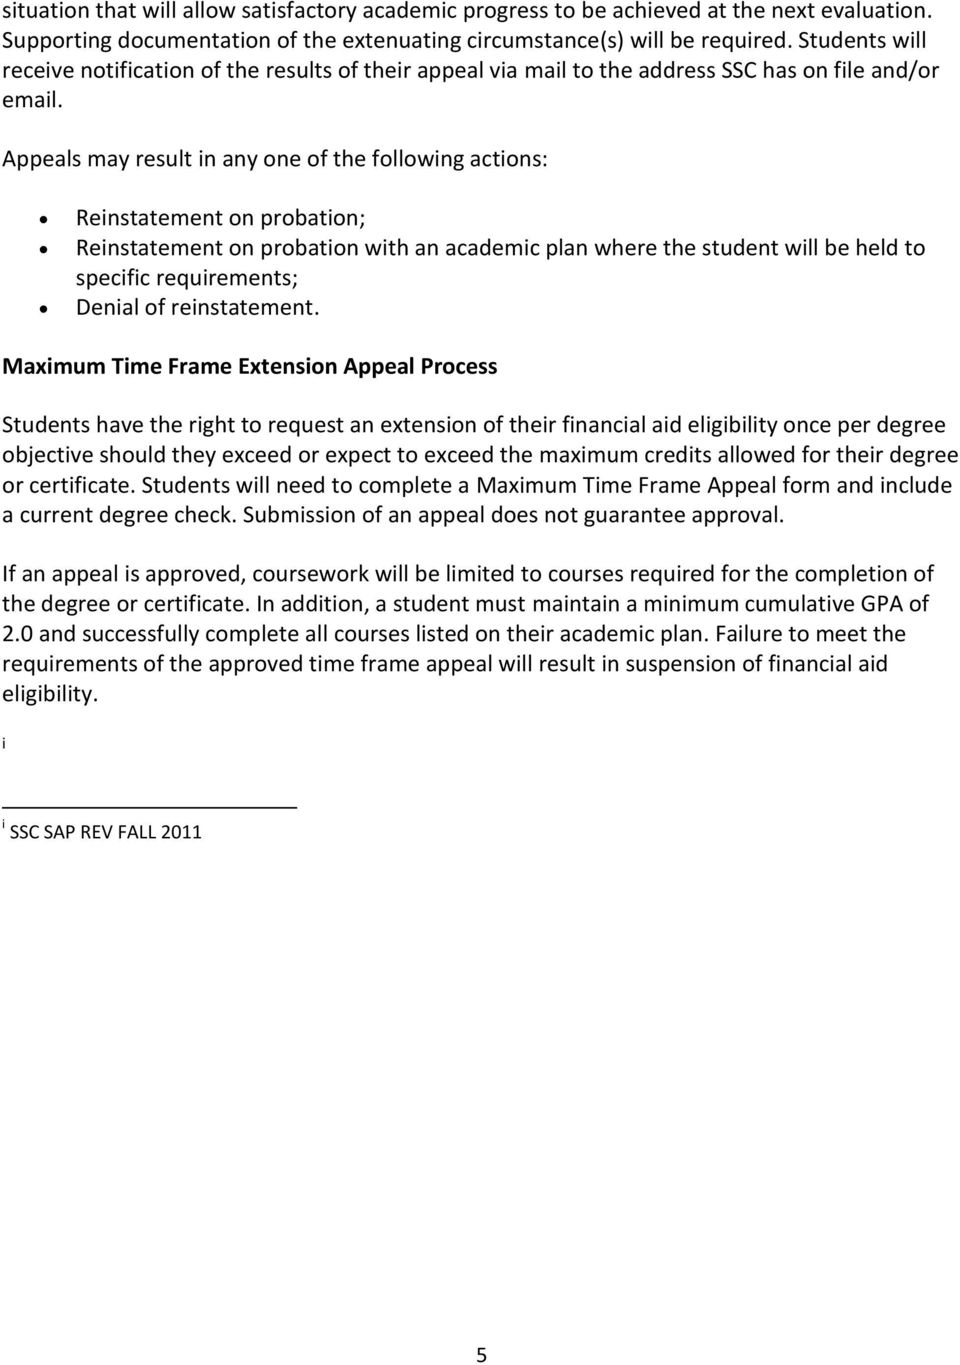 Appeals may result in any one of the following actions: Reinstatement on probation; Reinstatement on probation with an academic plan where the student will be held to specific requirements; Denial of